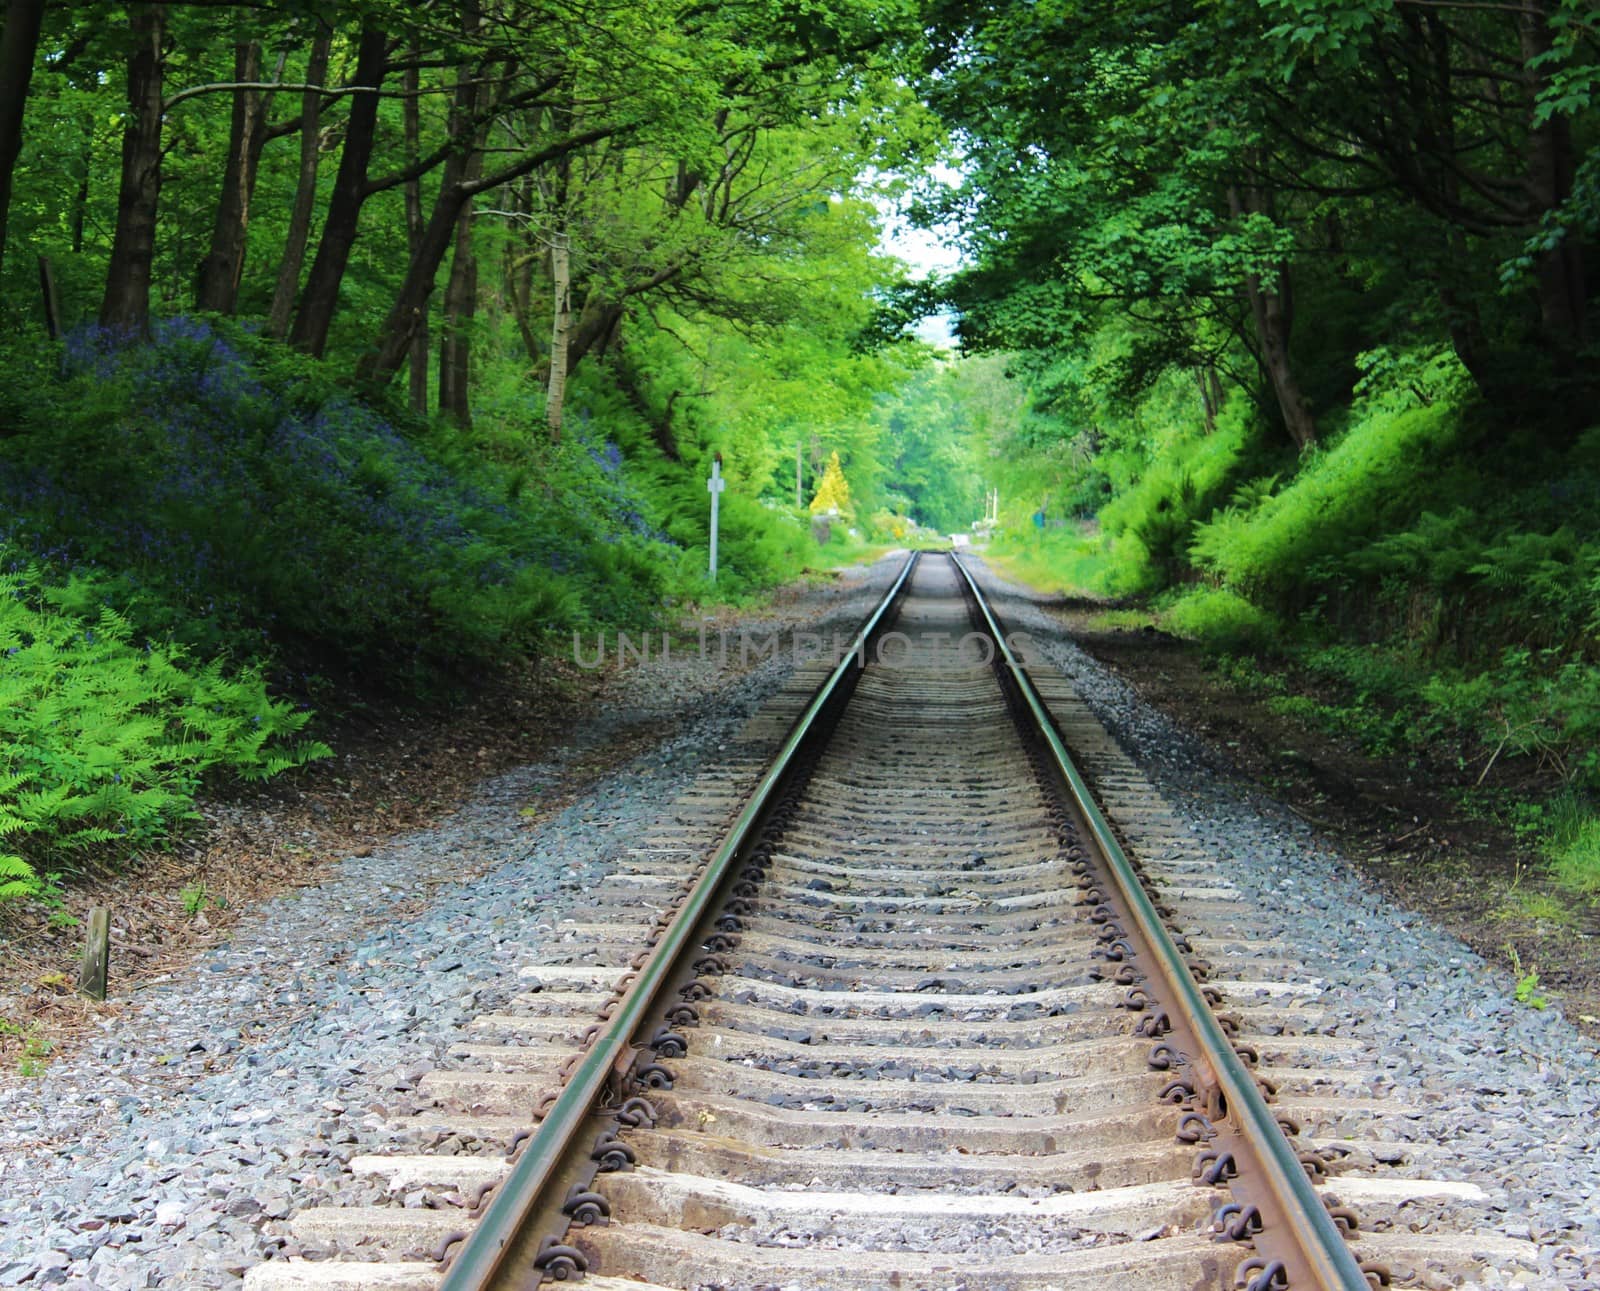 A railway track in the English countryside.